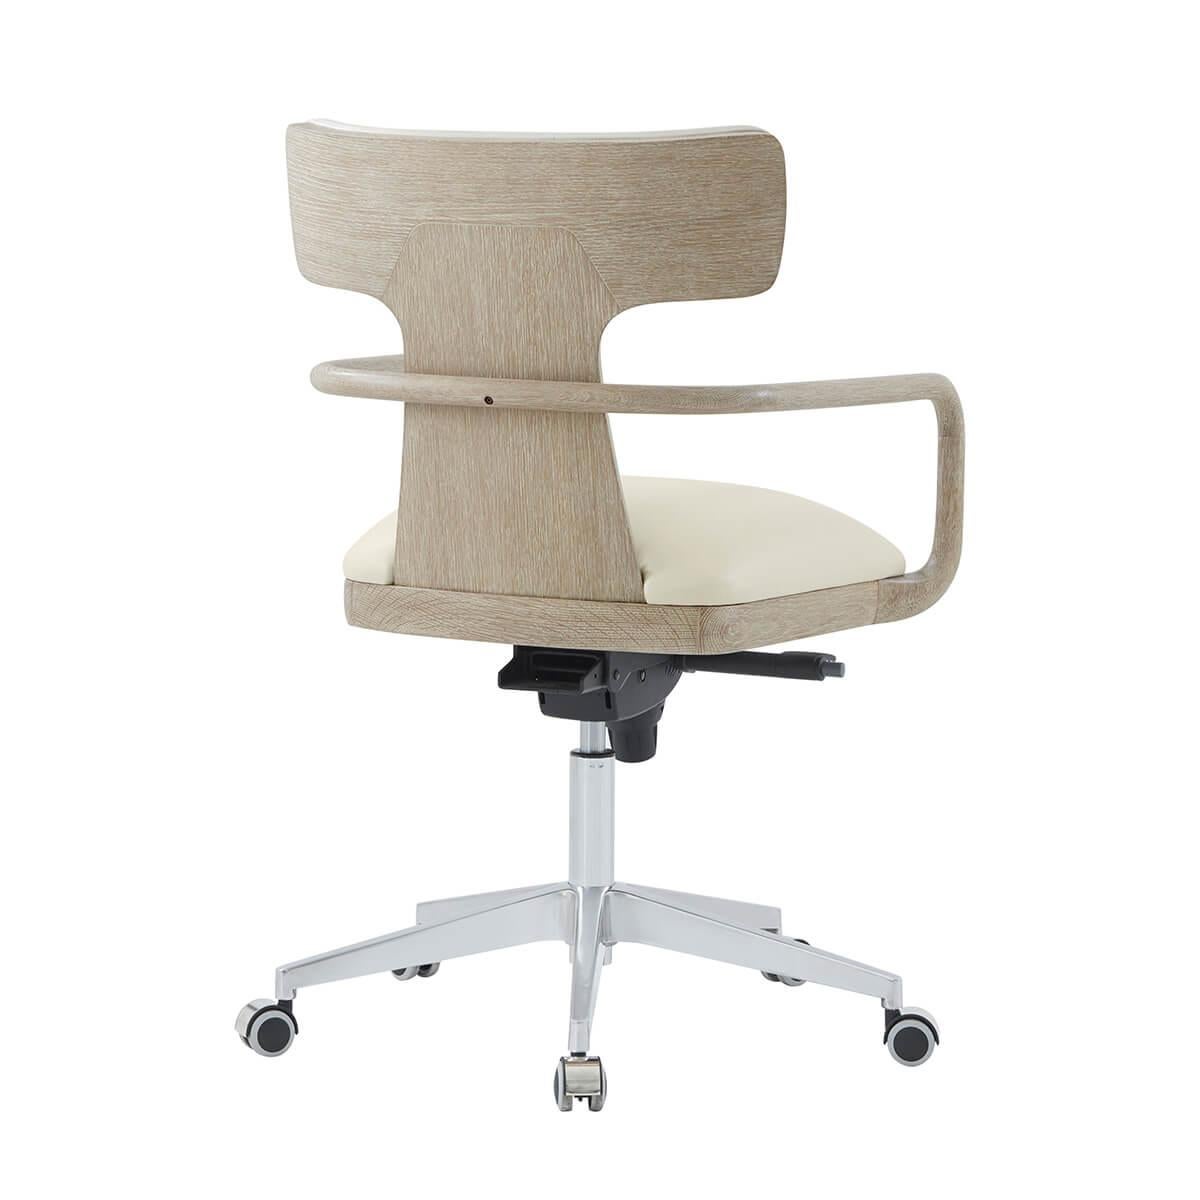 With natural wood bent arms curved and flowing from around the back and gracefully merging into the base as if it were one solid piece. The adjustable height and swivel chair is completed with a firmly upholstered seat and sturdy base with durable